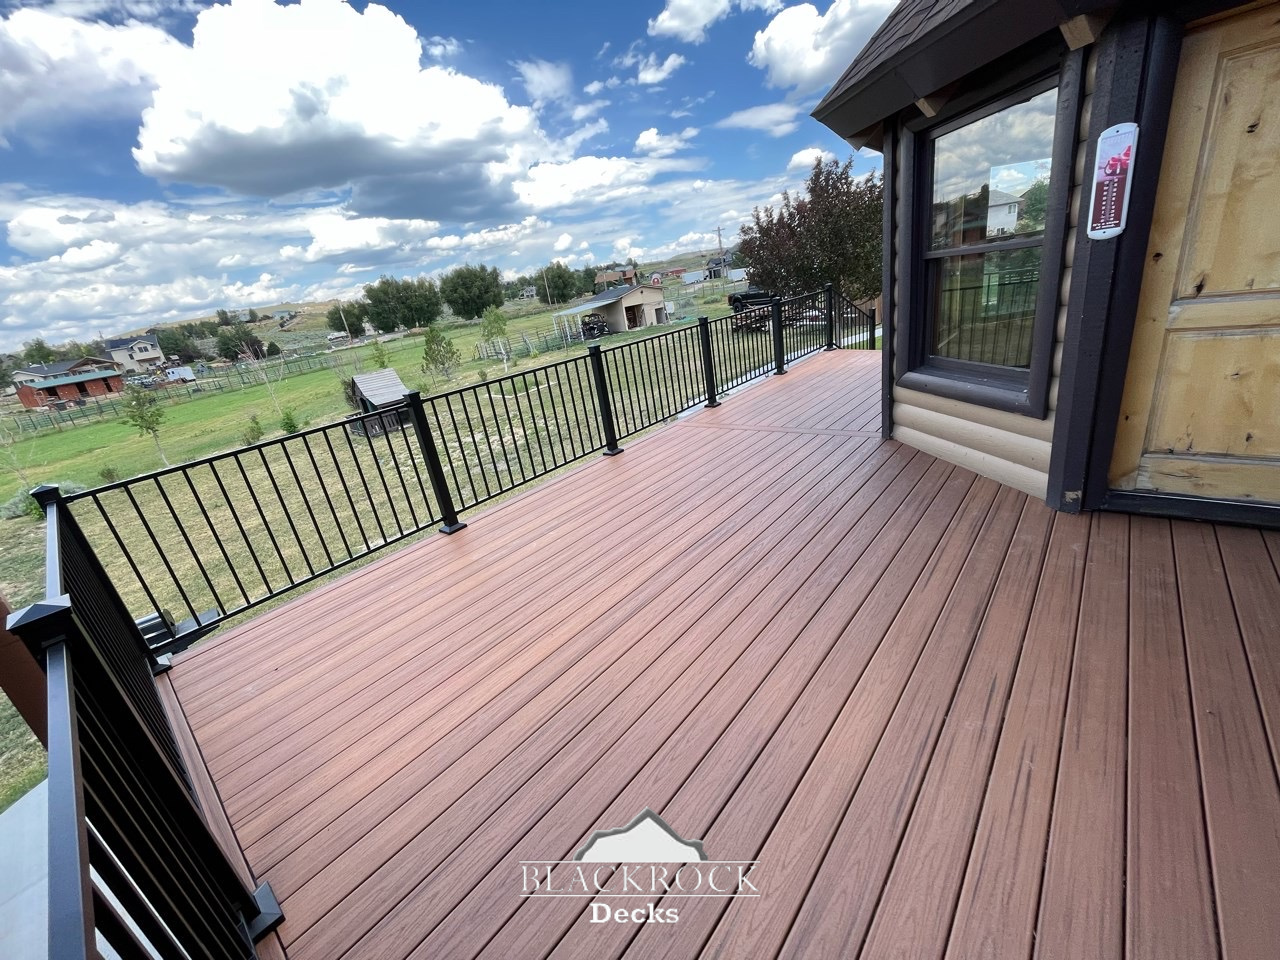 Looking for quality pergolas, patio covers, or decks in West Bountiful, Utah? Contact Blackrock Decks at 801-515-2261 for a consultation.